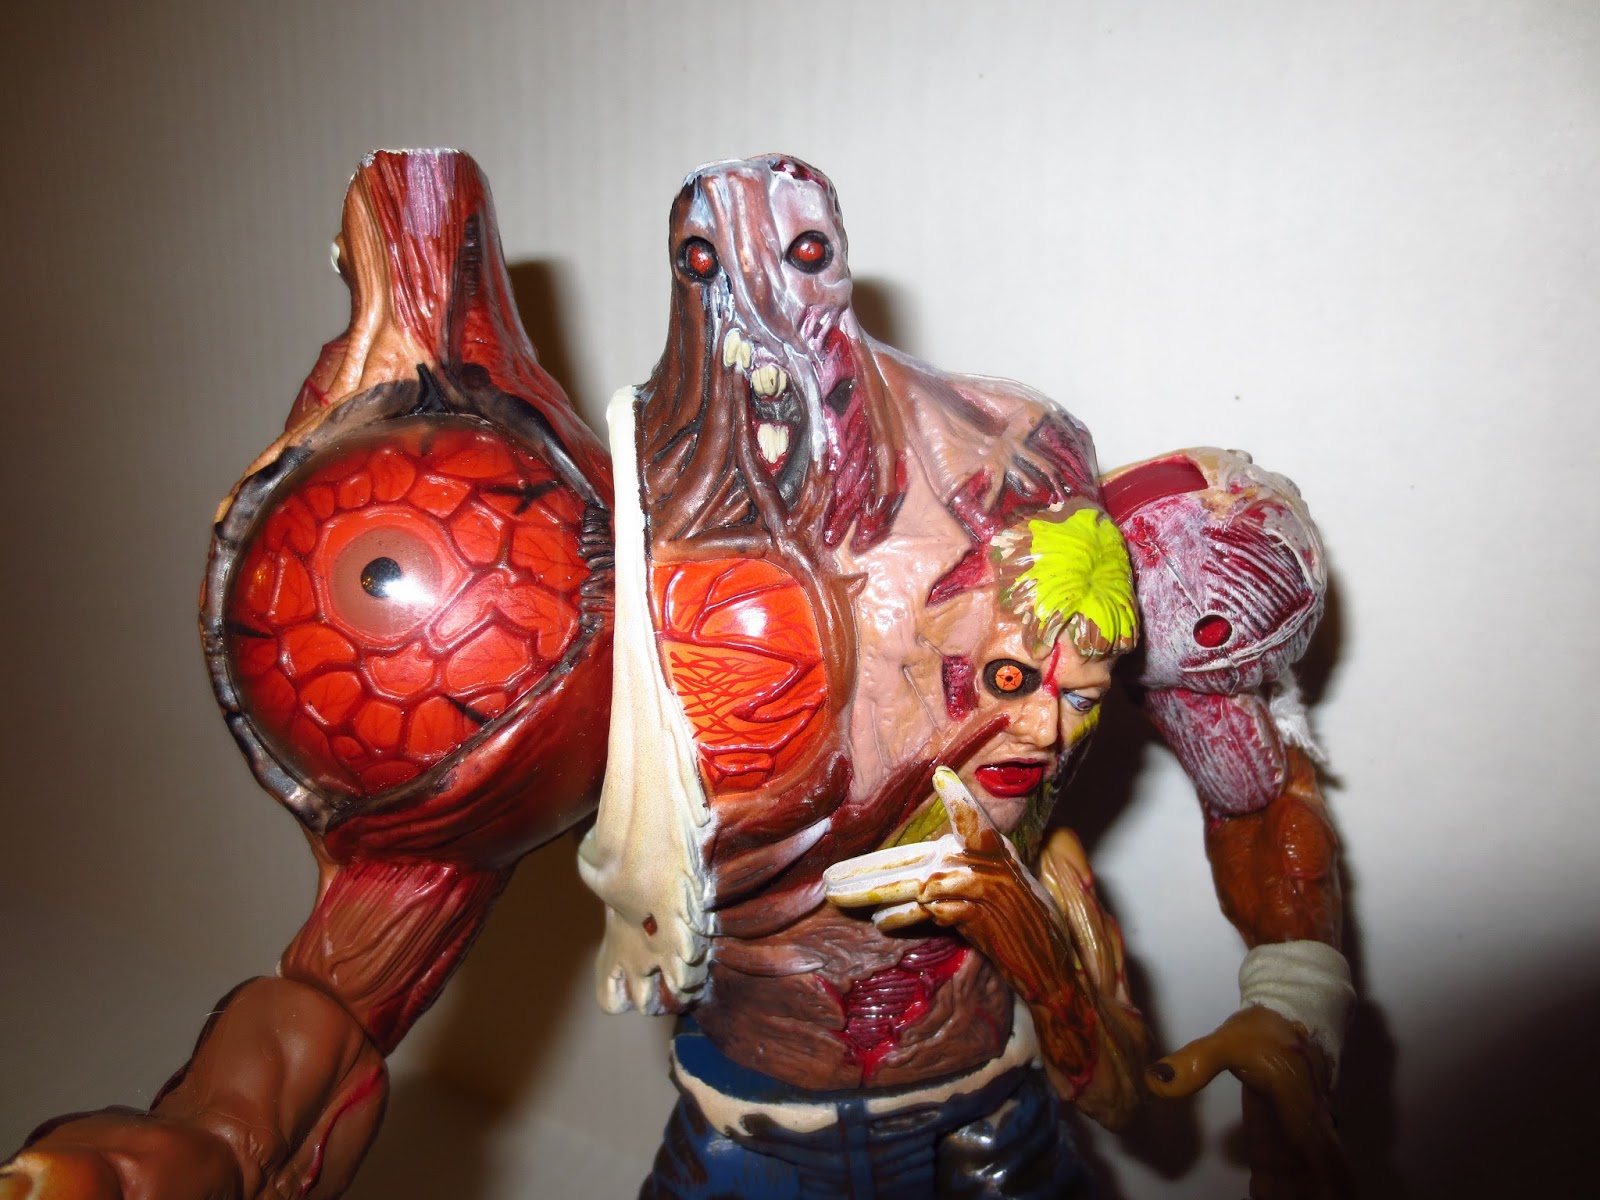 The Epic Review: Action Figure Review: William Birkin and 